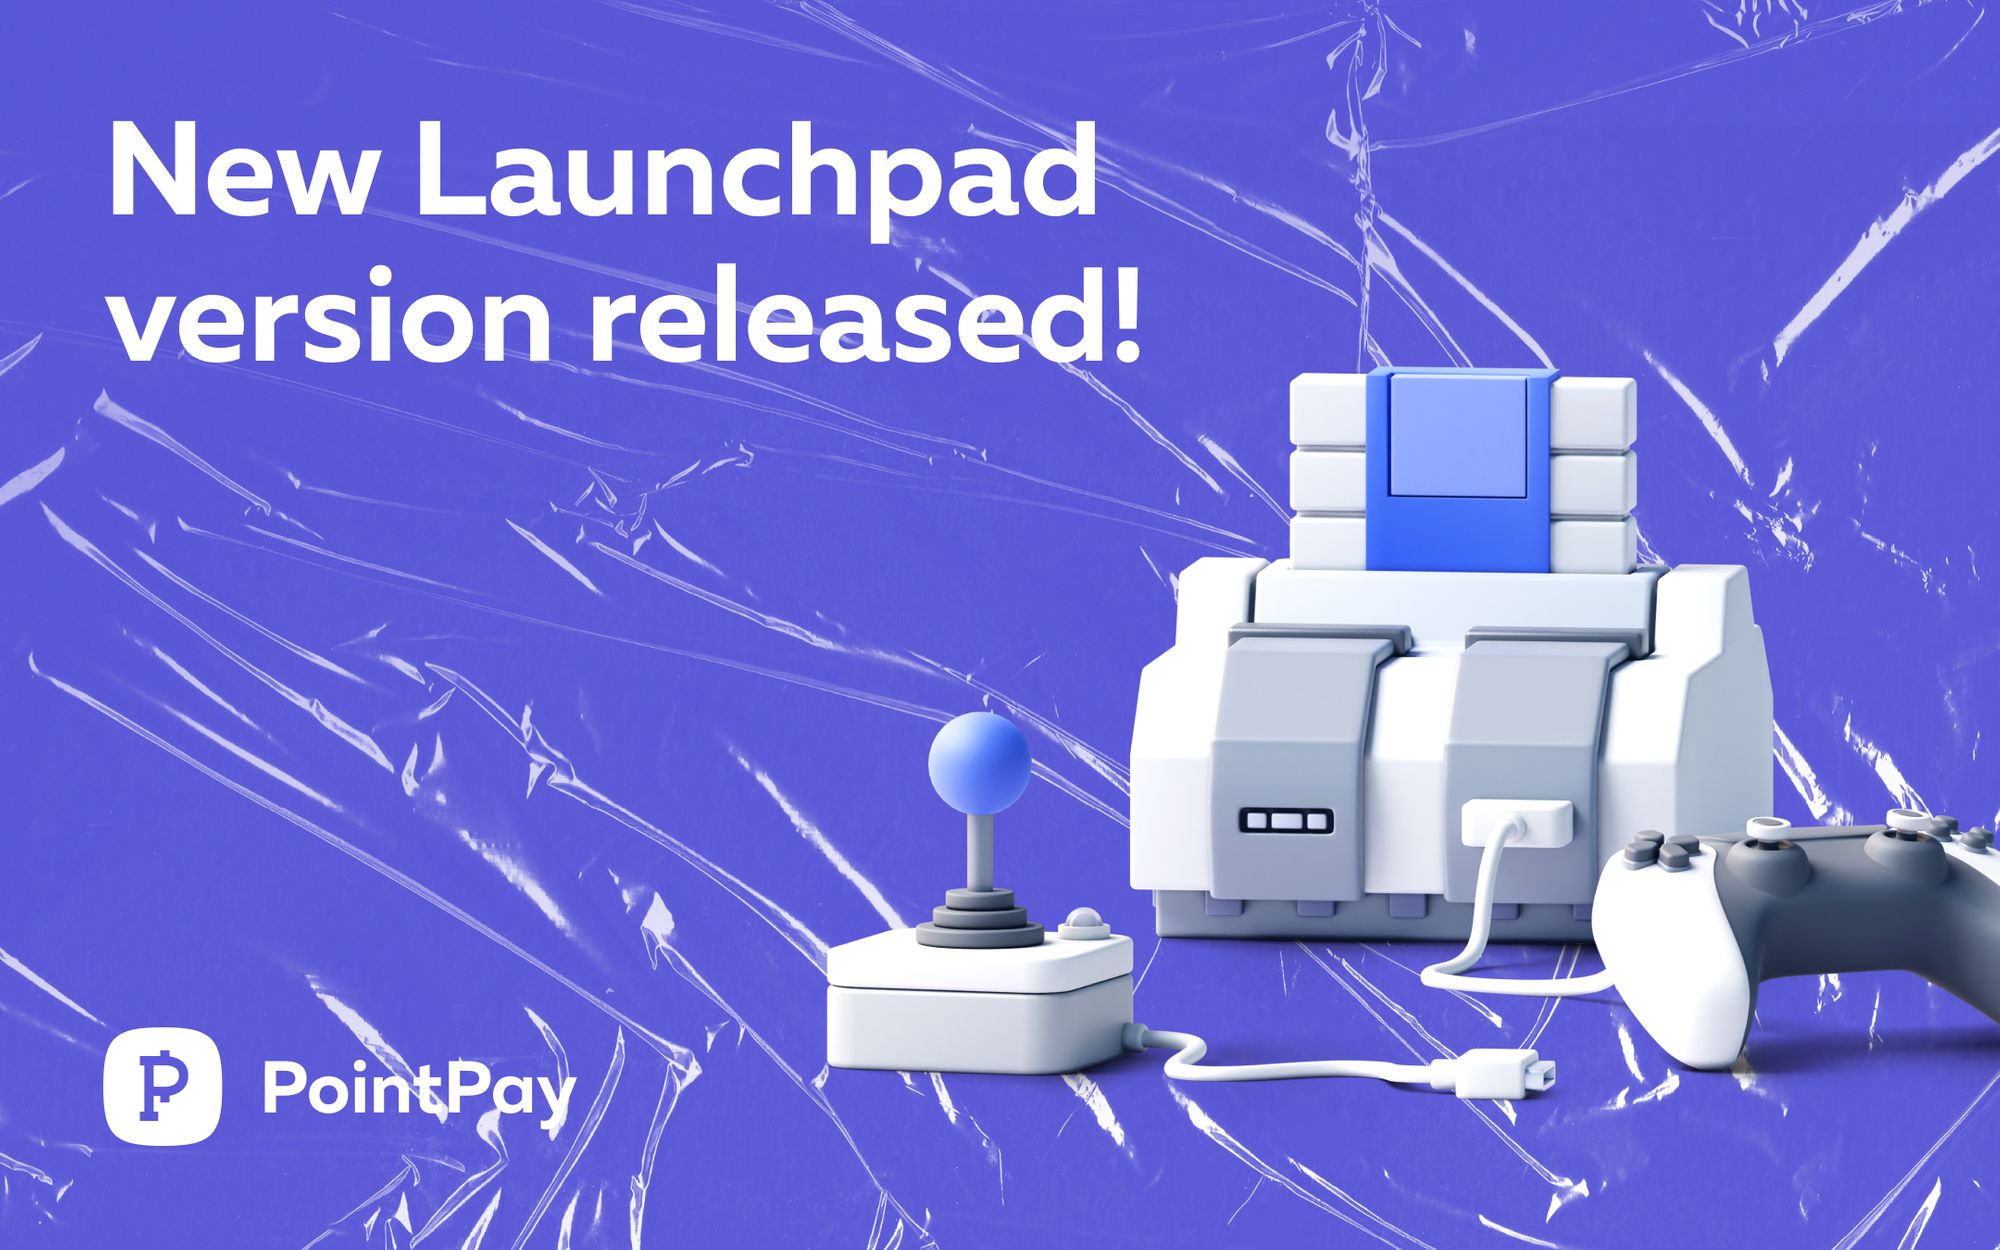 The updated Launchpad is already here!